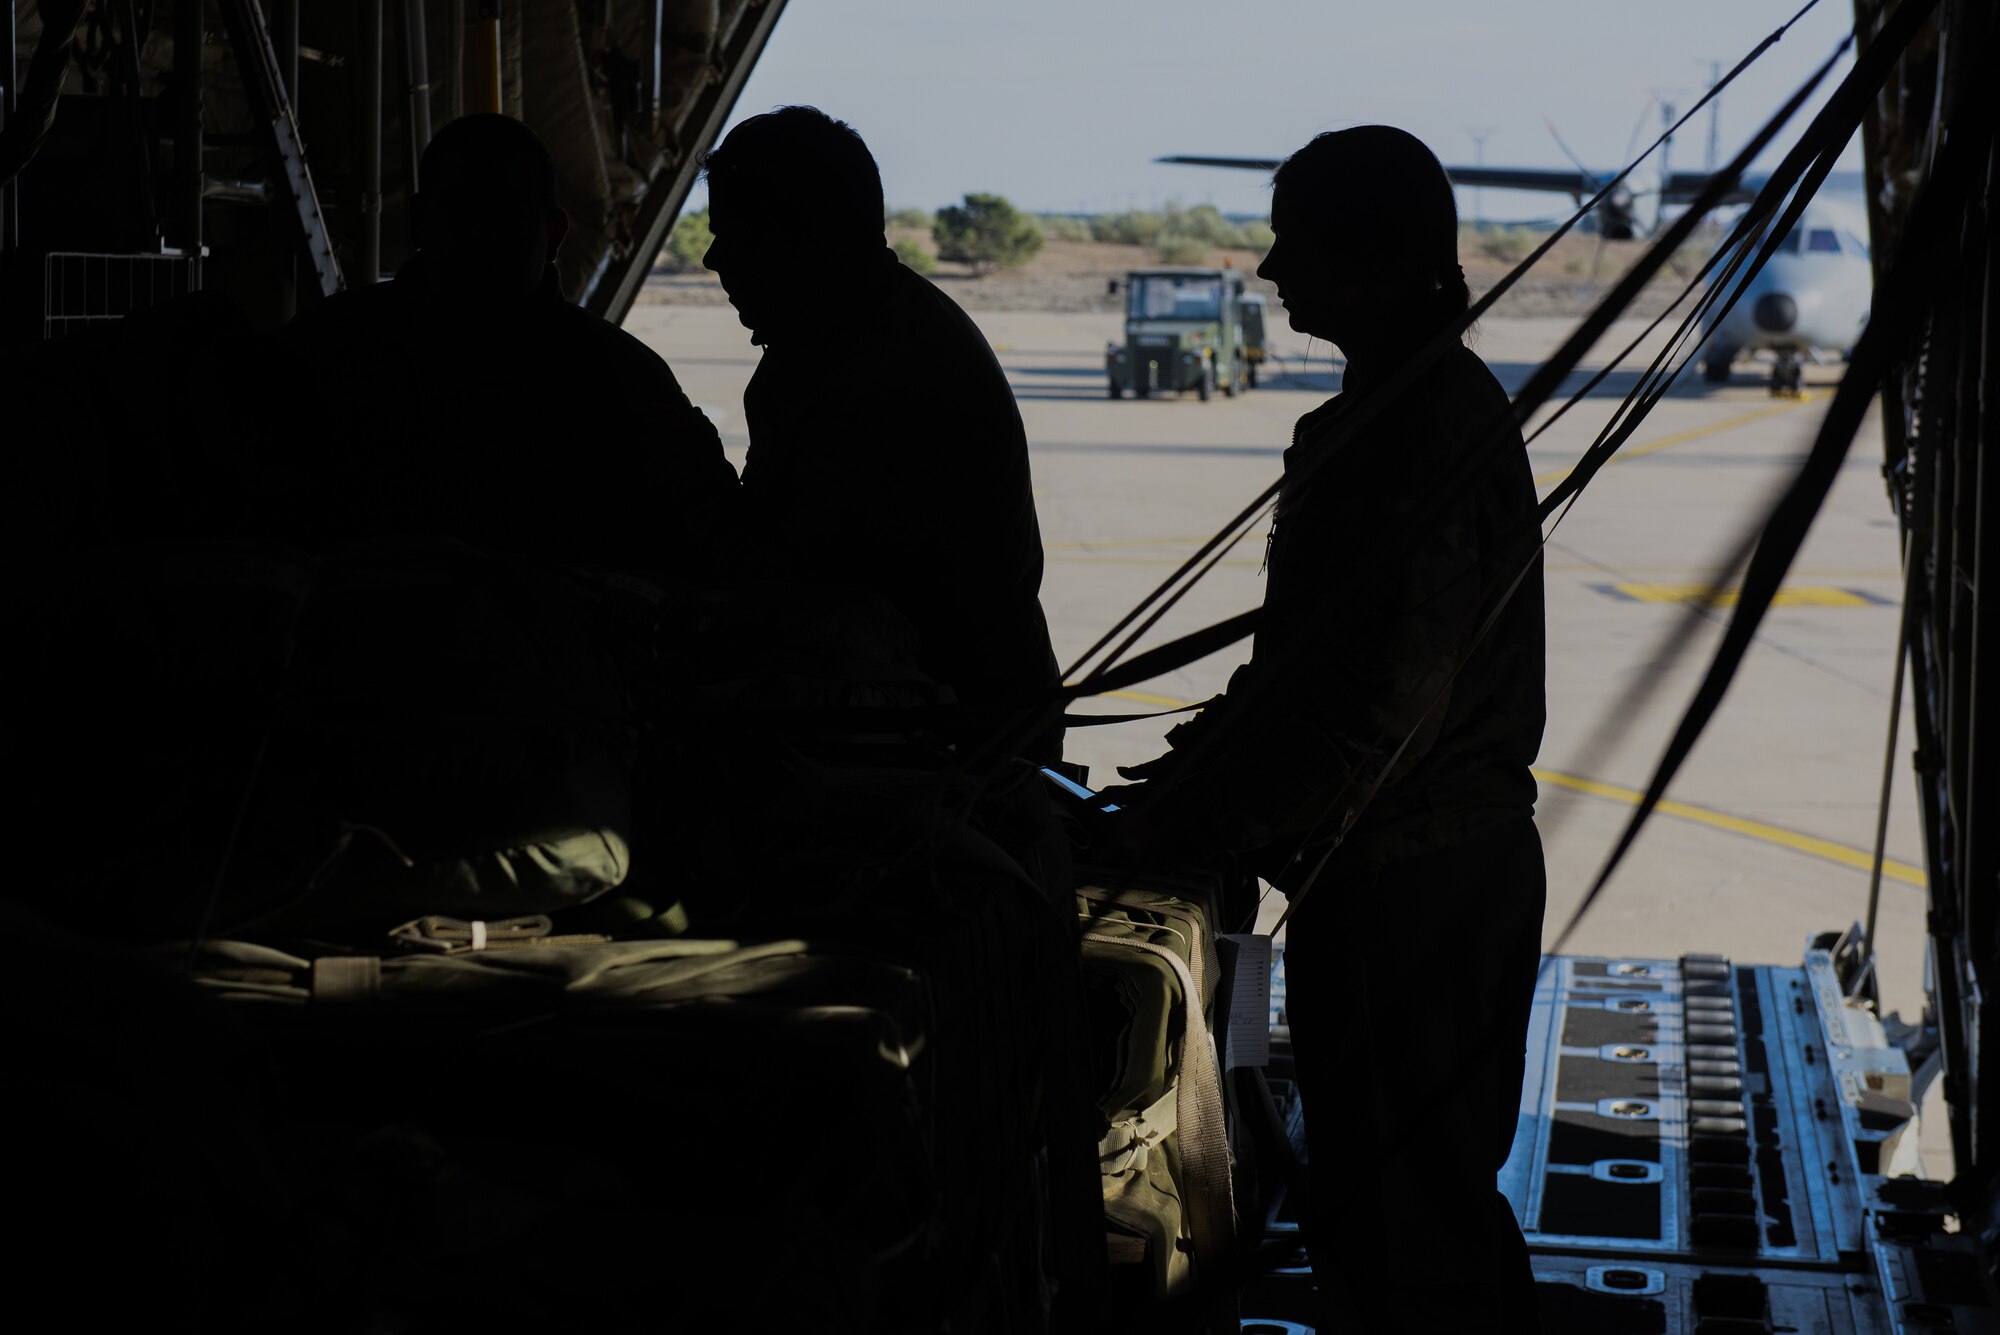 3 silhouettes of people secure cargo in a plane